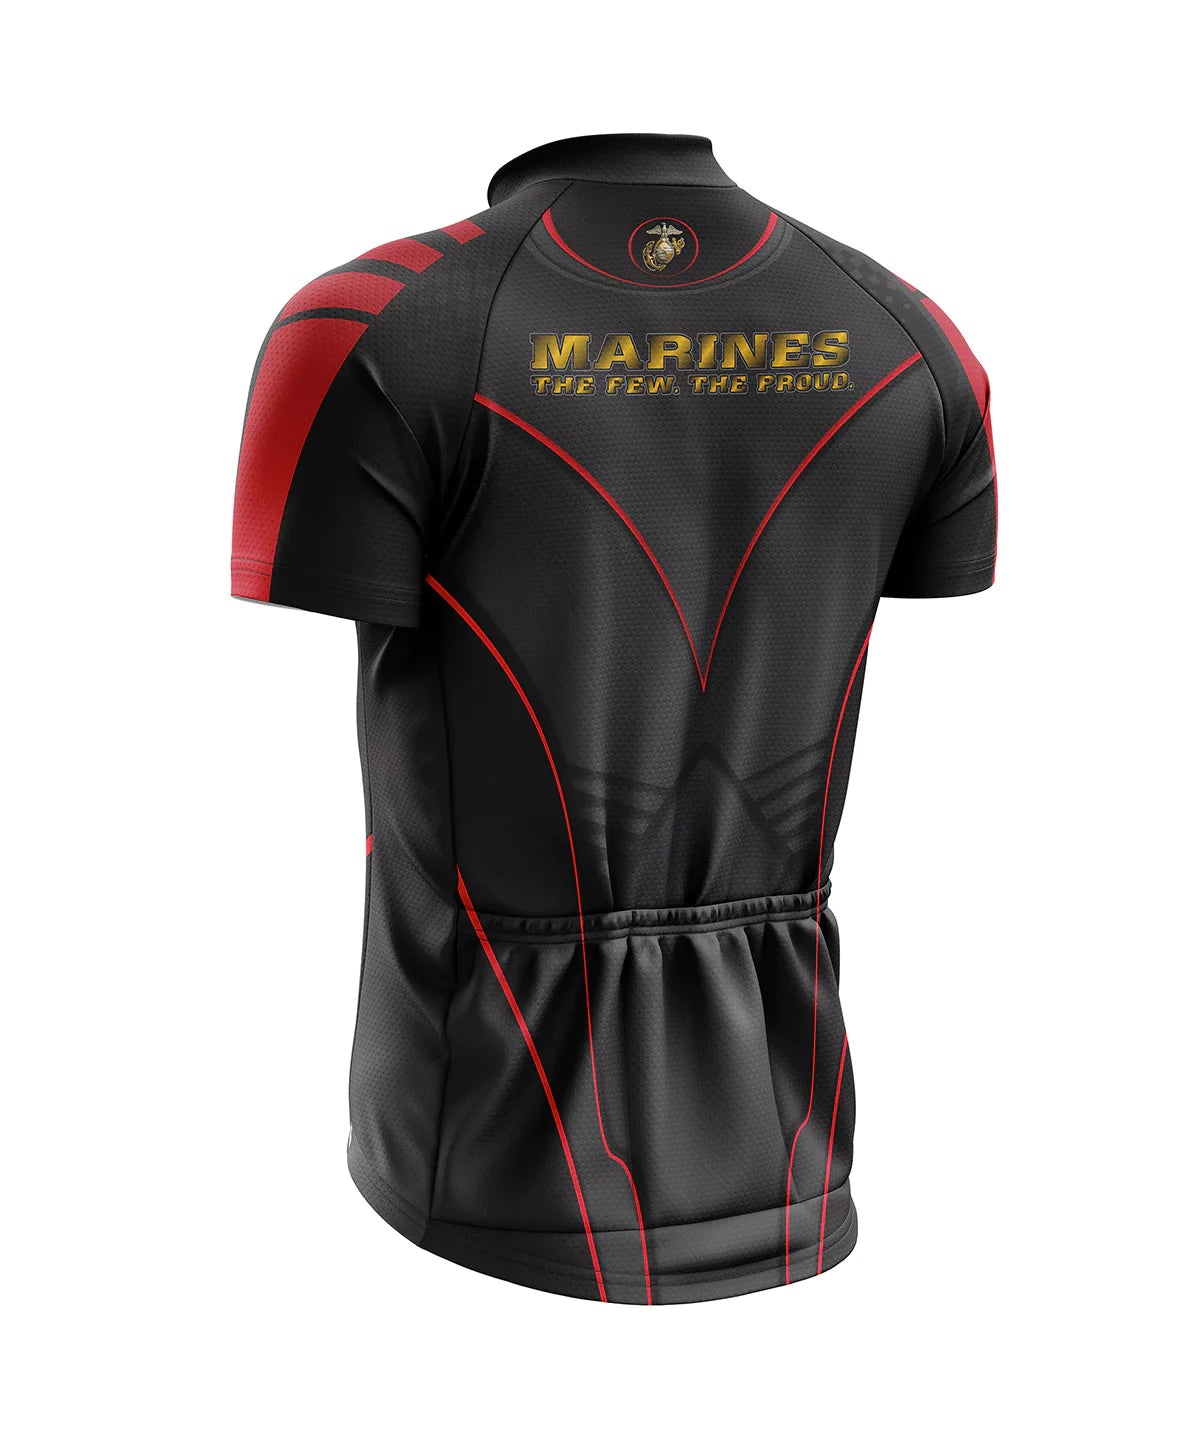 Classic Men's Marine Corps Cycling Jersey - USMC THE FEW. THE PROUD with Red and black